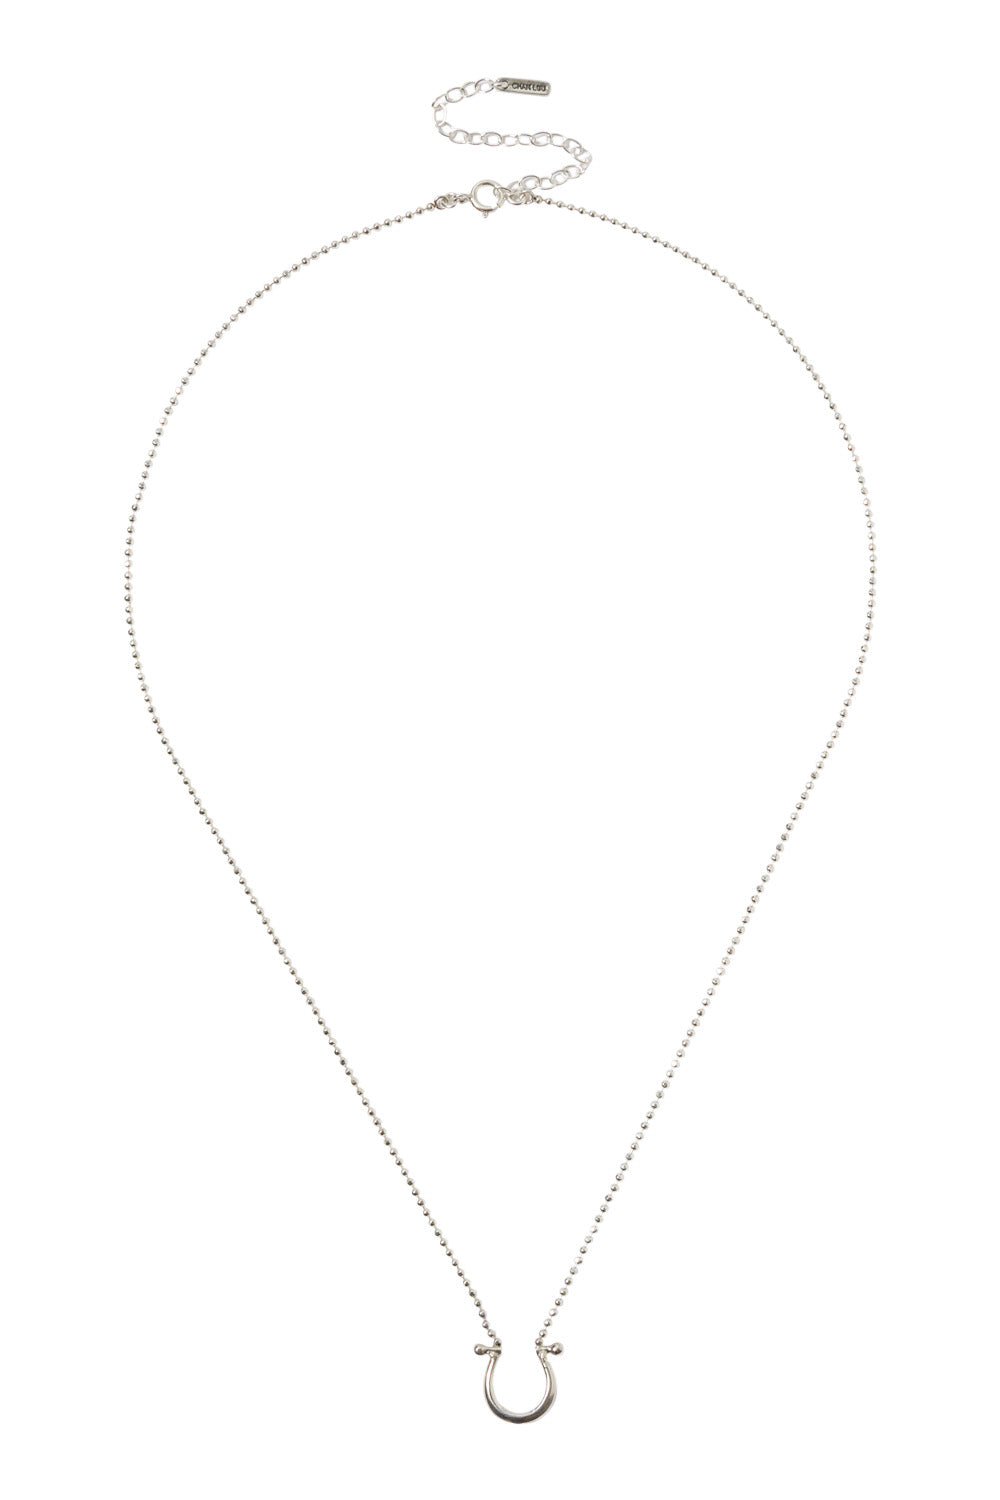 Chan Luu Horseshoe Necklace in Silver